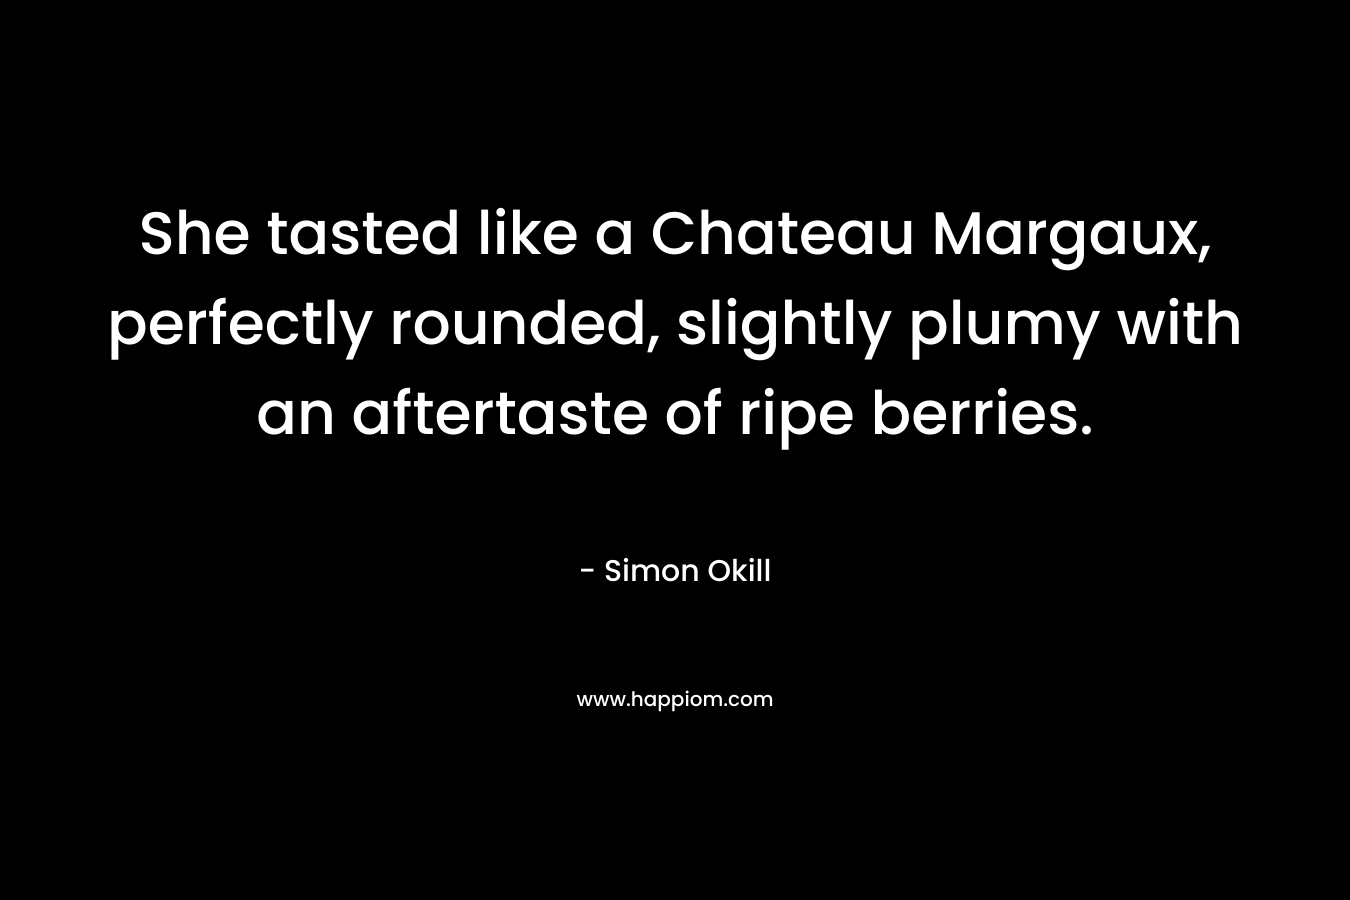 She tasted like a Chateau Margaux, perfectly rounded, slightly plumy with an aftertaste of ripe berries.